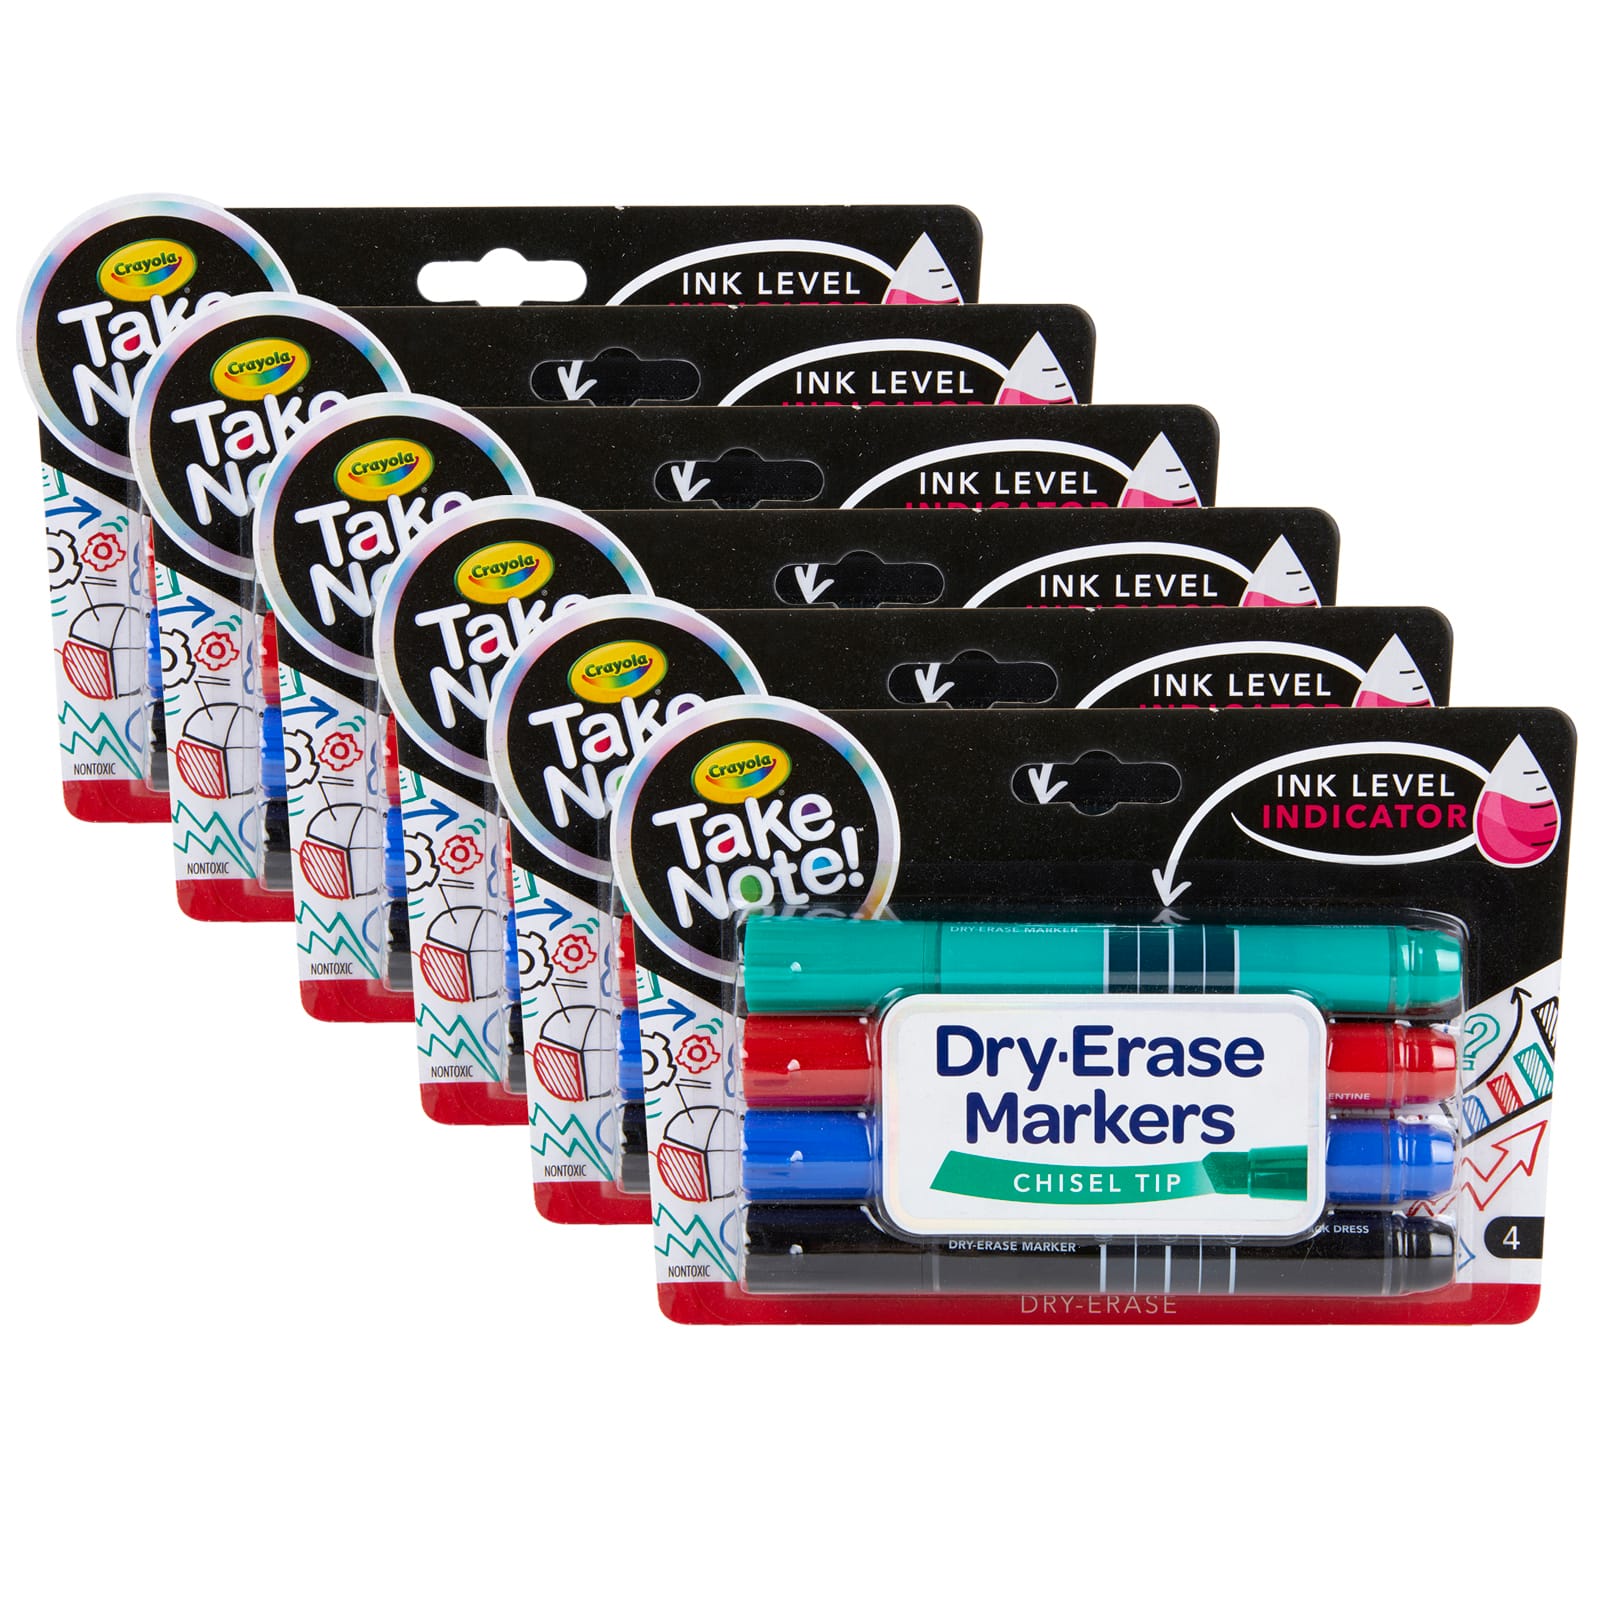 Low Odor Dry Erase Markers, Chisel Tip, 4 Count, Crayola.com